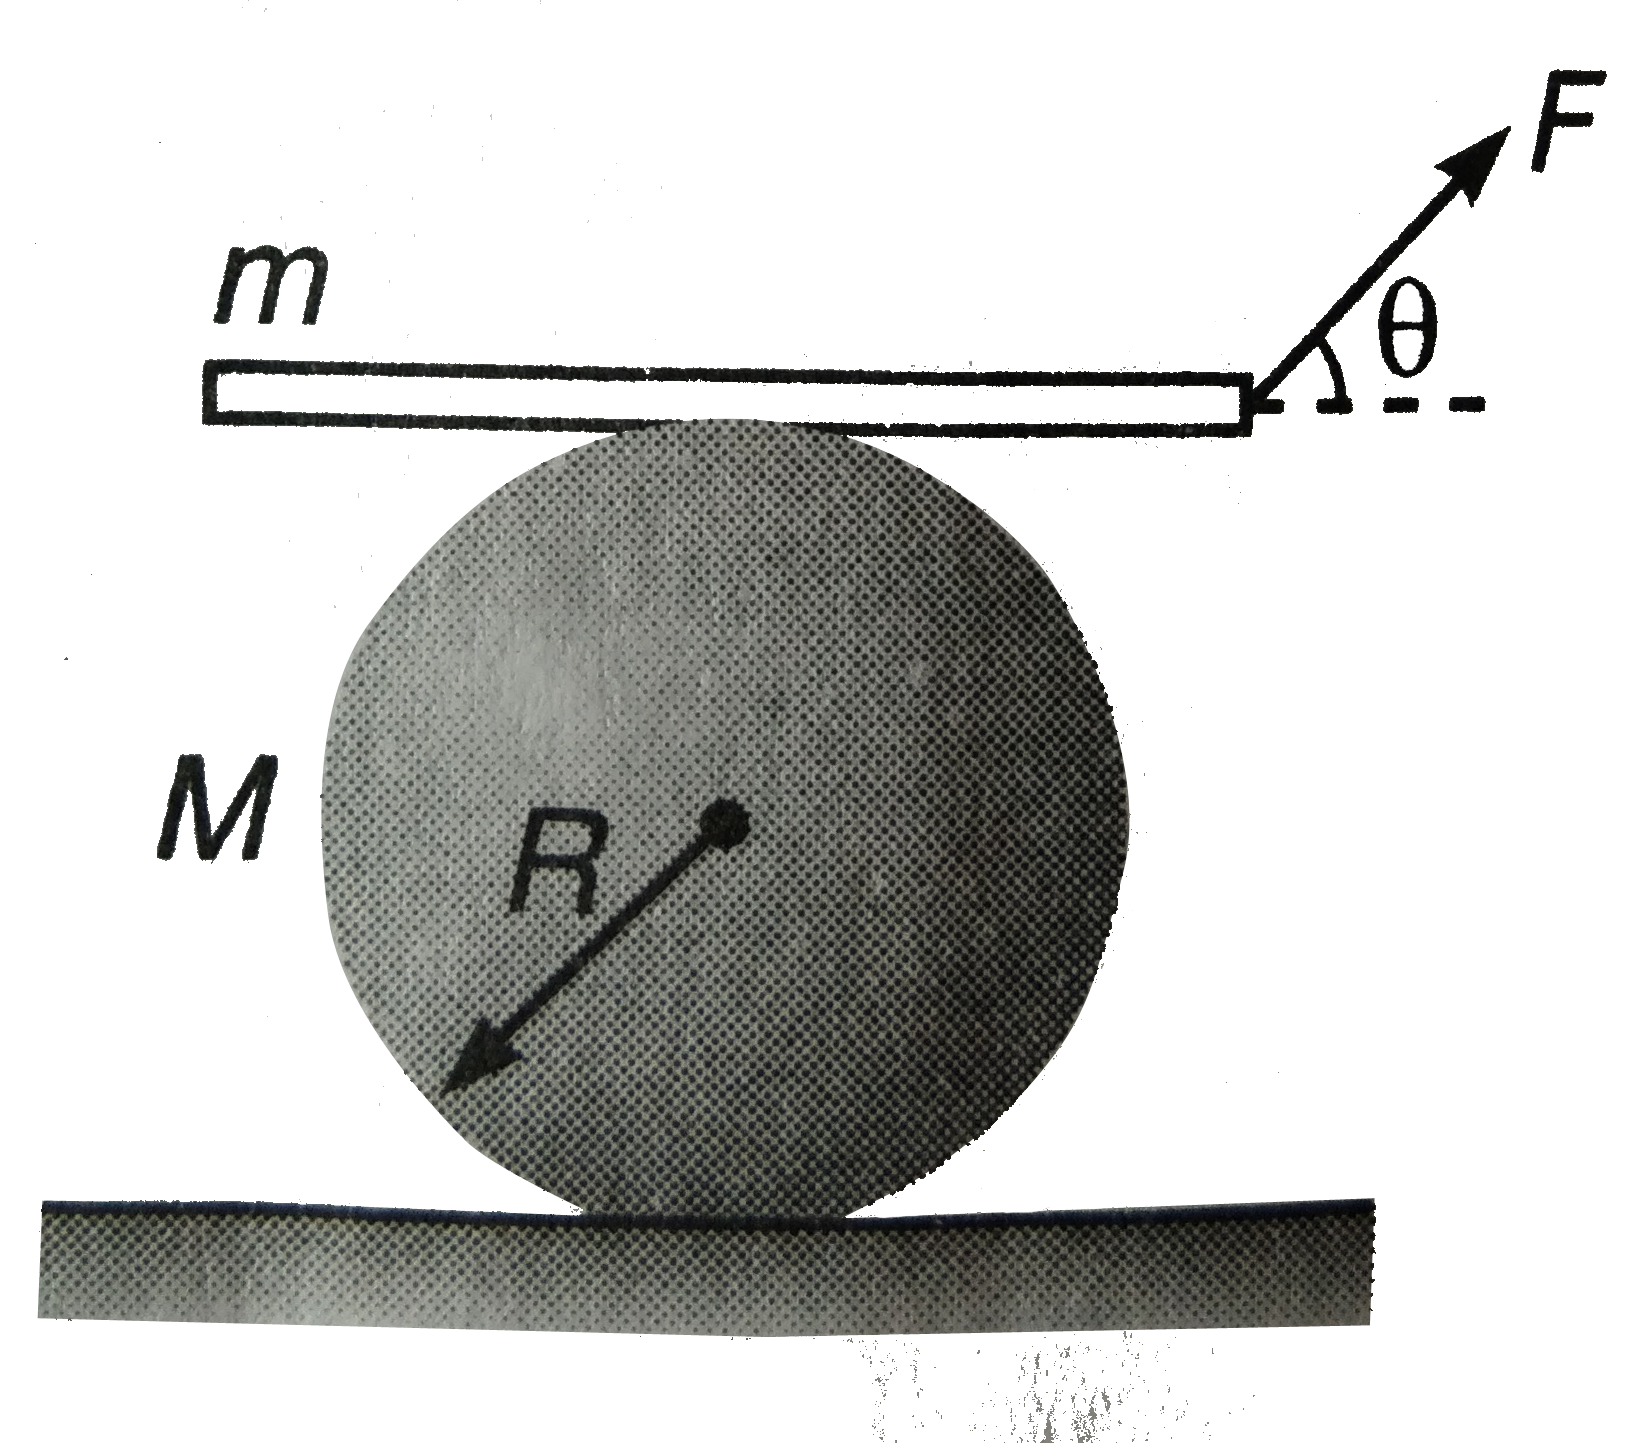 Consider a cylinder of mass M and radius R lying on a rough horizontal plane. It has a plank lying on its top as shown in figure. A force F is applied on the plank such that the plank moves and causes the cylinder to roll the plank always remains horizontal. there is no slipping at any point of contact. Calculate the acceleration of the cylinder and the frictional forces at the two contact.